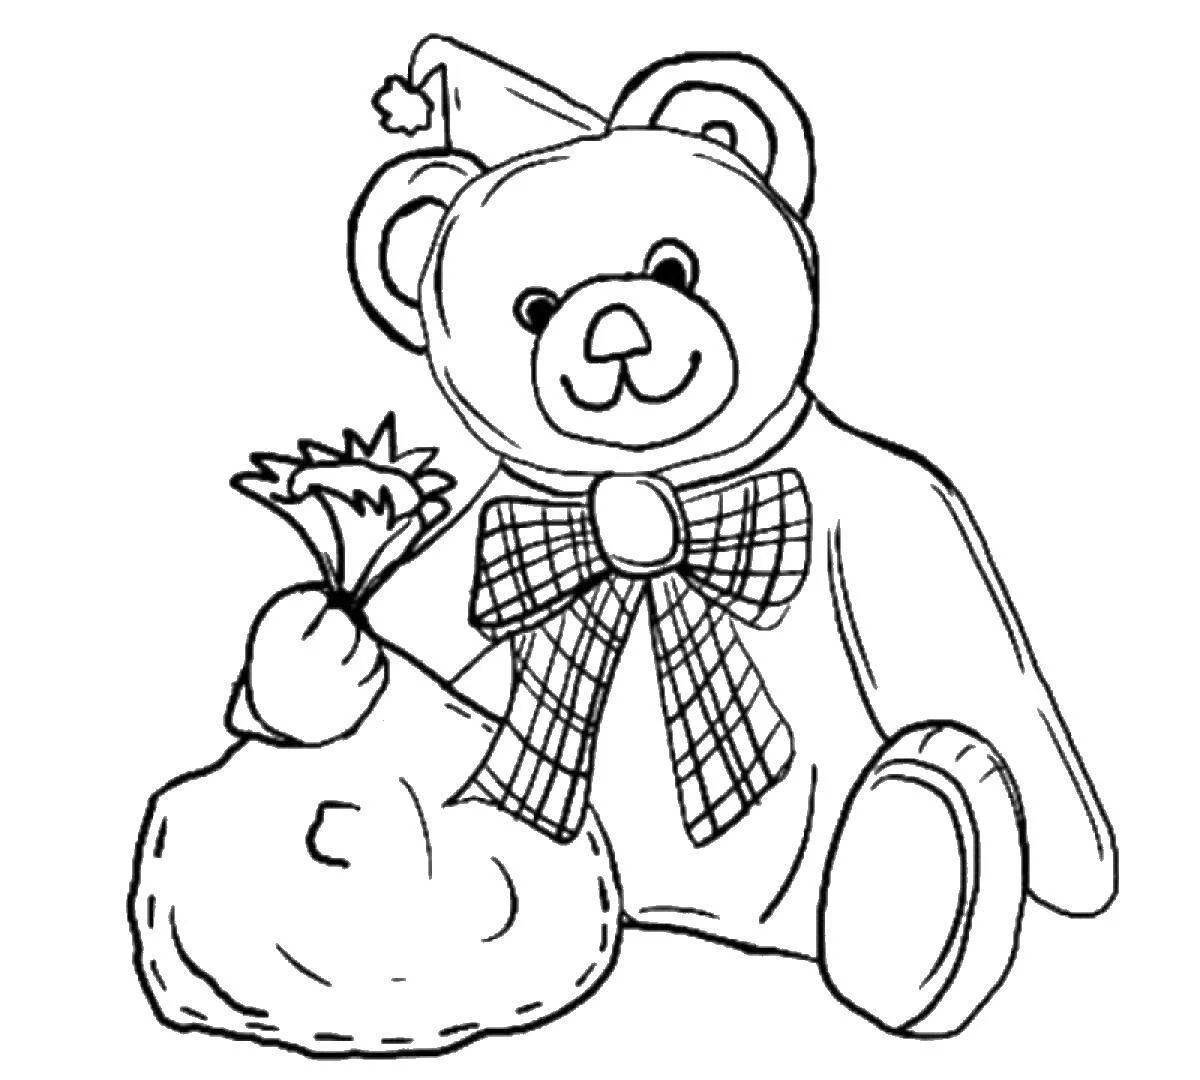 Coloring book bubble bear with a gift